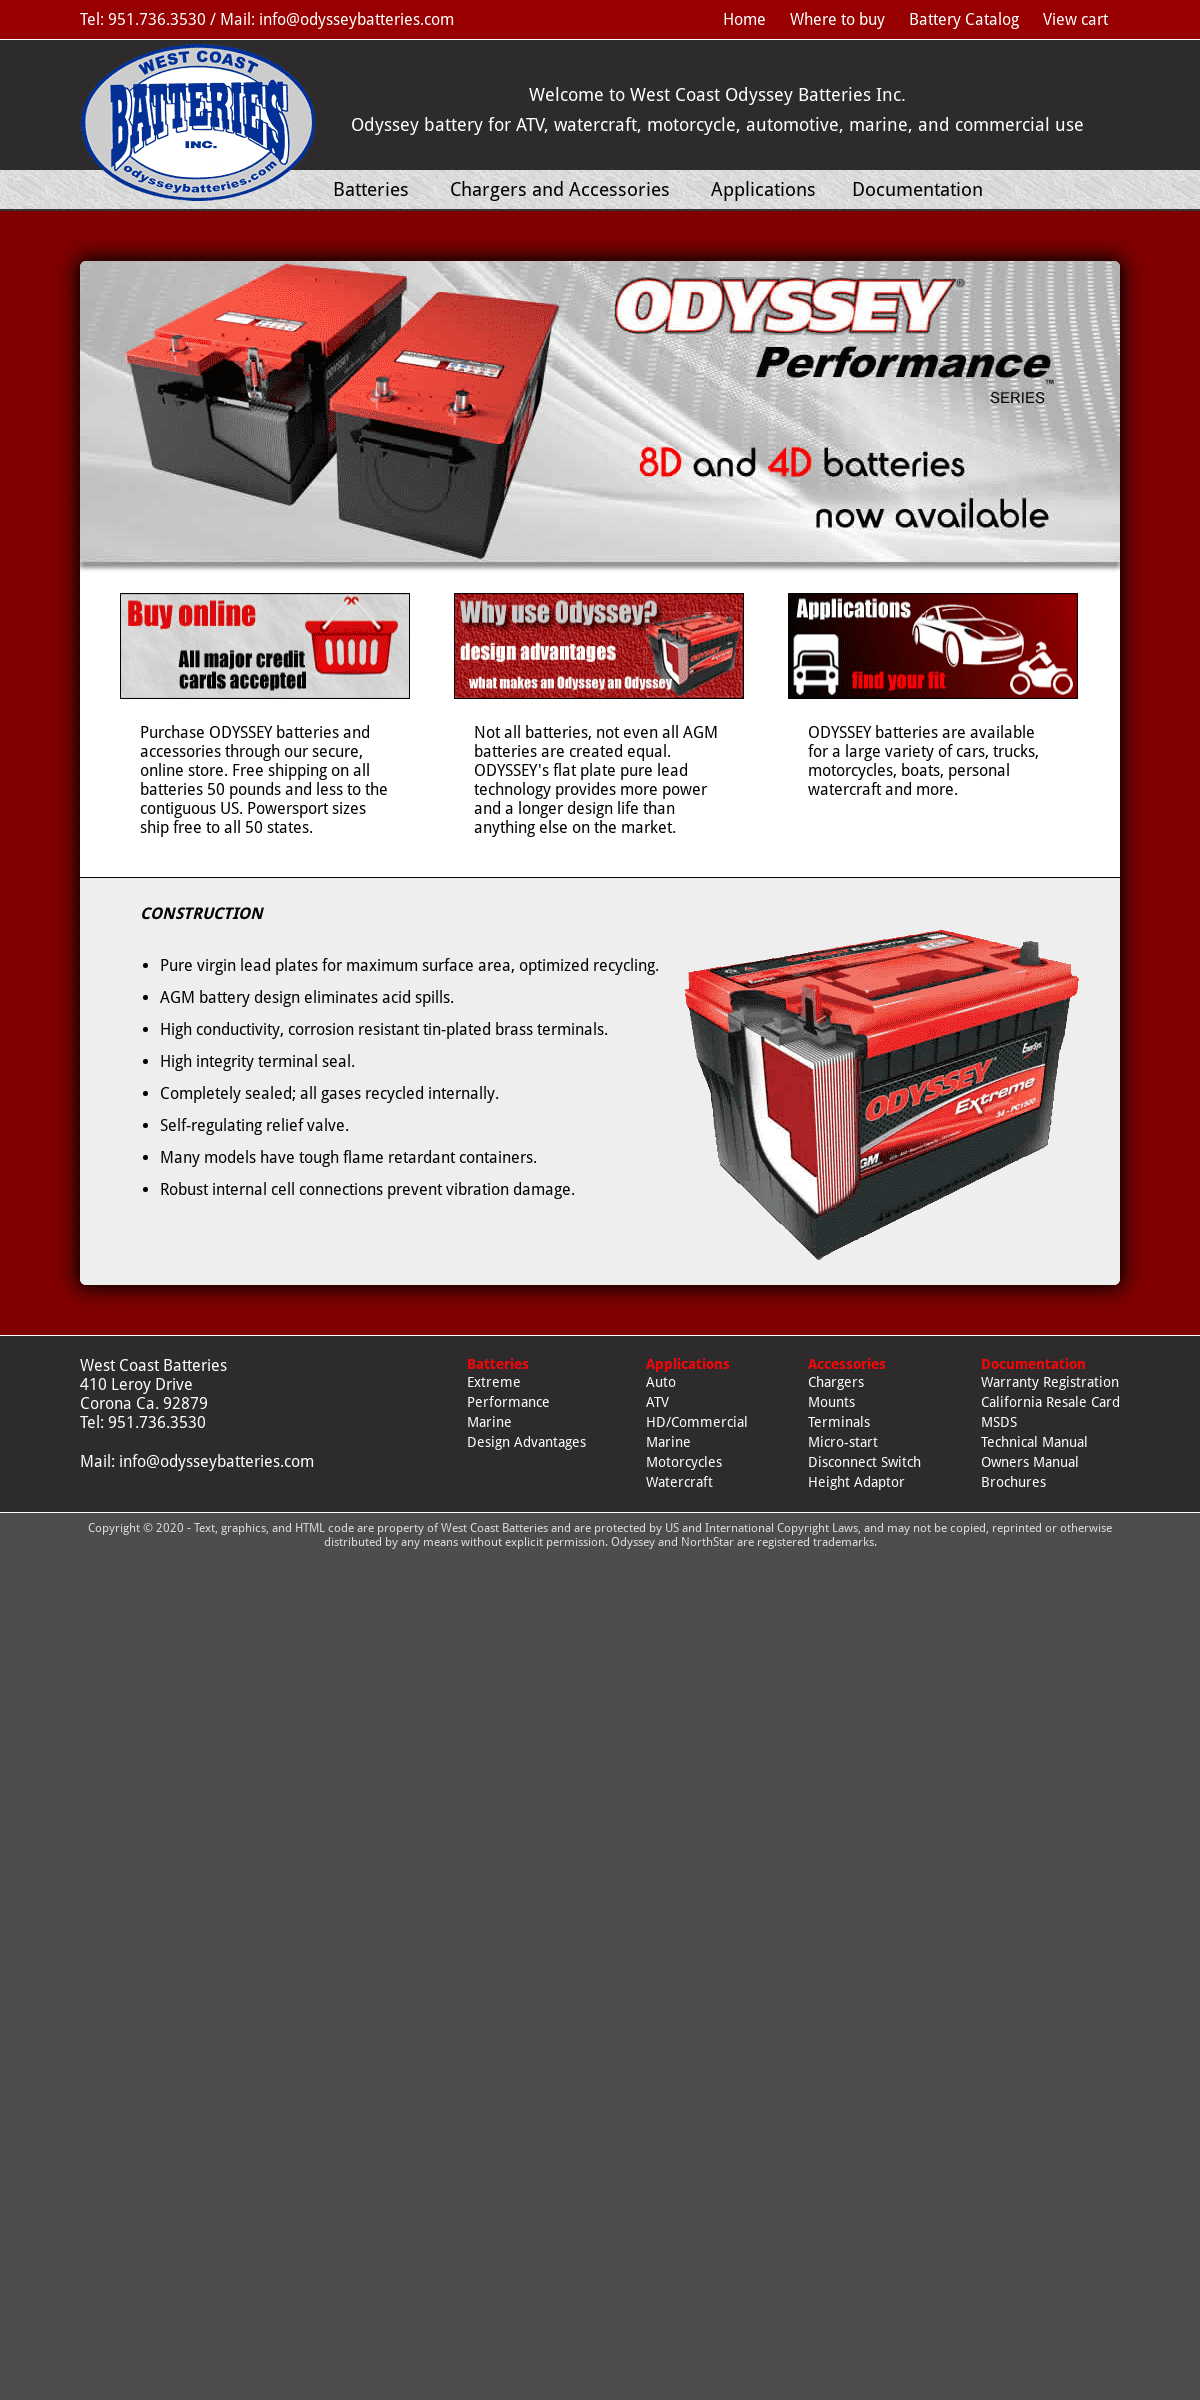 A complete backup of odysseybatteries.com